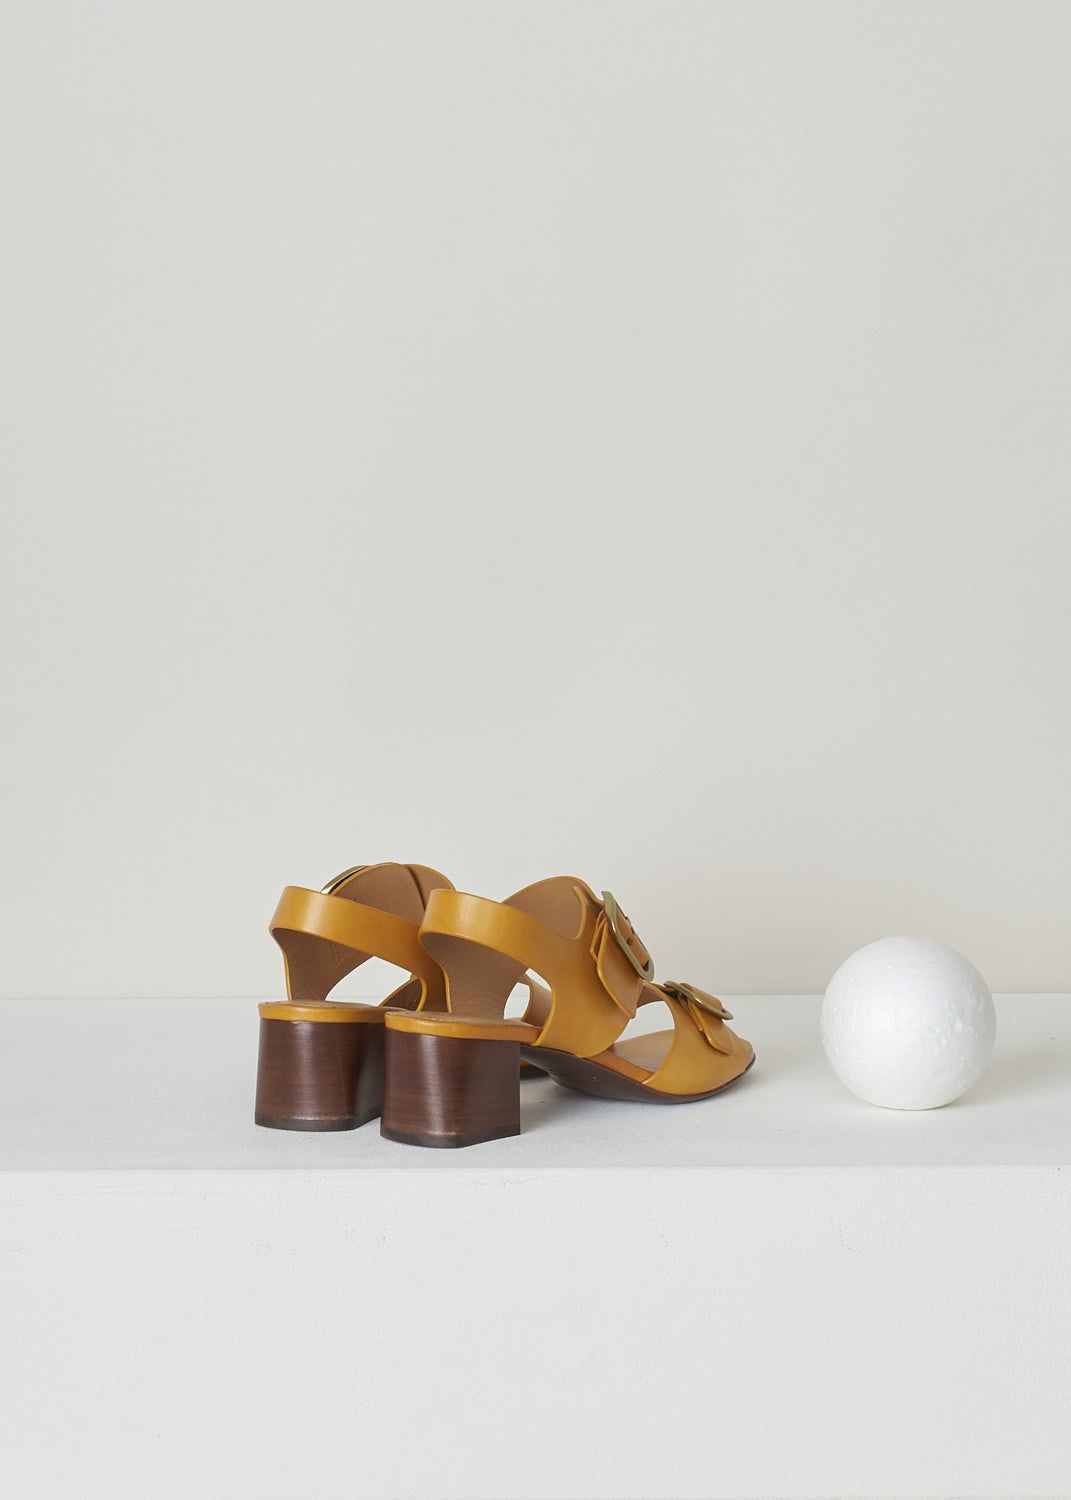 TODS, ORANGE BUCKLE SANDALS WITH HEEL, XXW04J0FH60NHVG816_SAND_CUOIO_MANDARINO, Orange, Yellow, Back, These orange heeled sandals have a double buckle-strap fastening with gold-toned buckles, a slingback strap and a squared open toe. 
